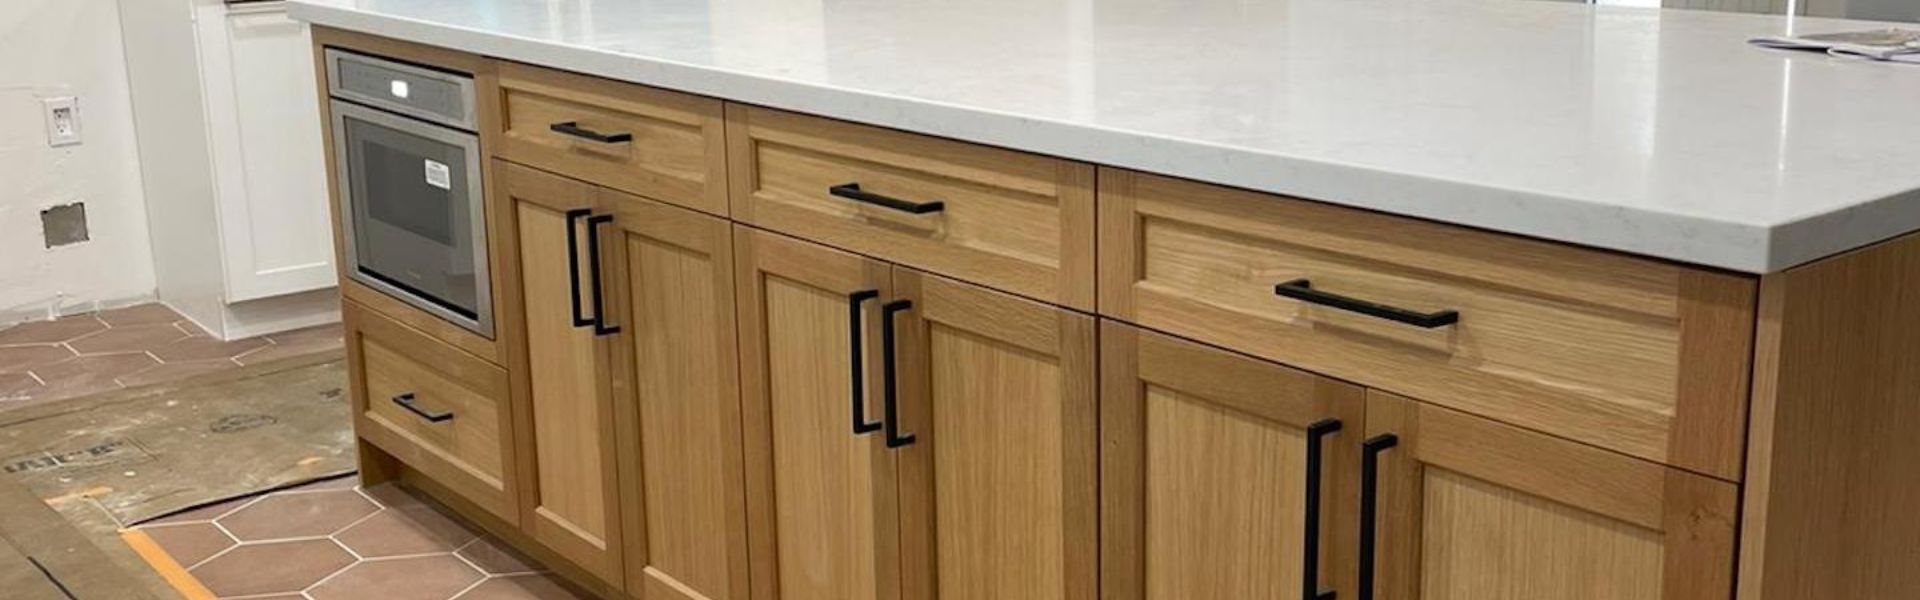 wholesale cabinets san diego